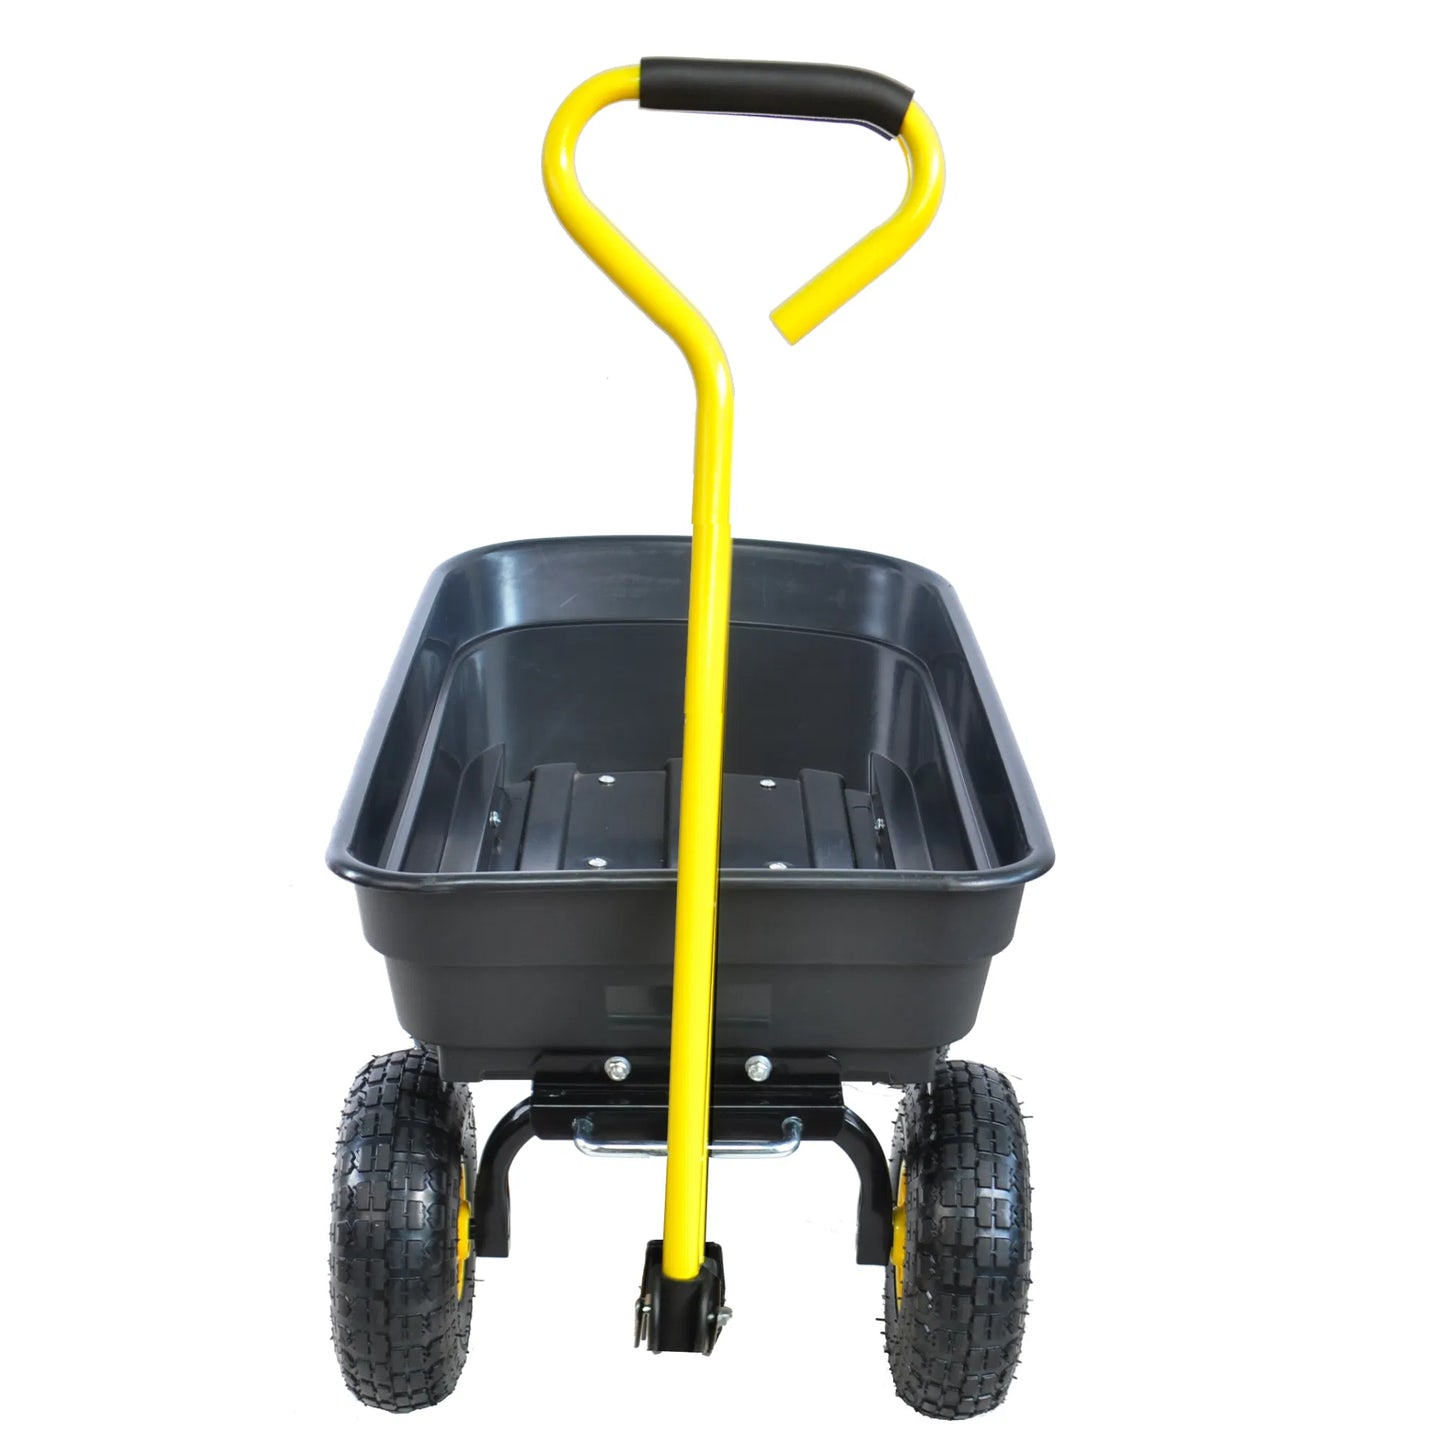 Folding wagon Poly Garden Dump Cart with Steel Frame and 10-in. Pneumatic Tires; 300-Pound Capacity